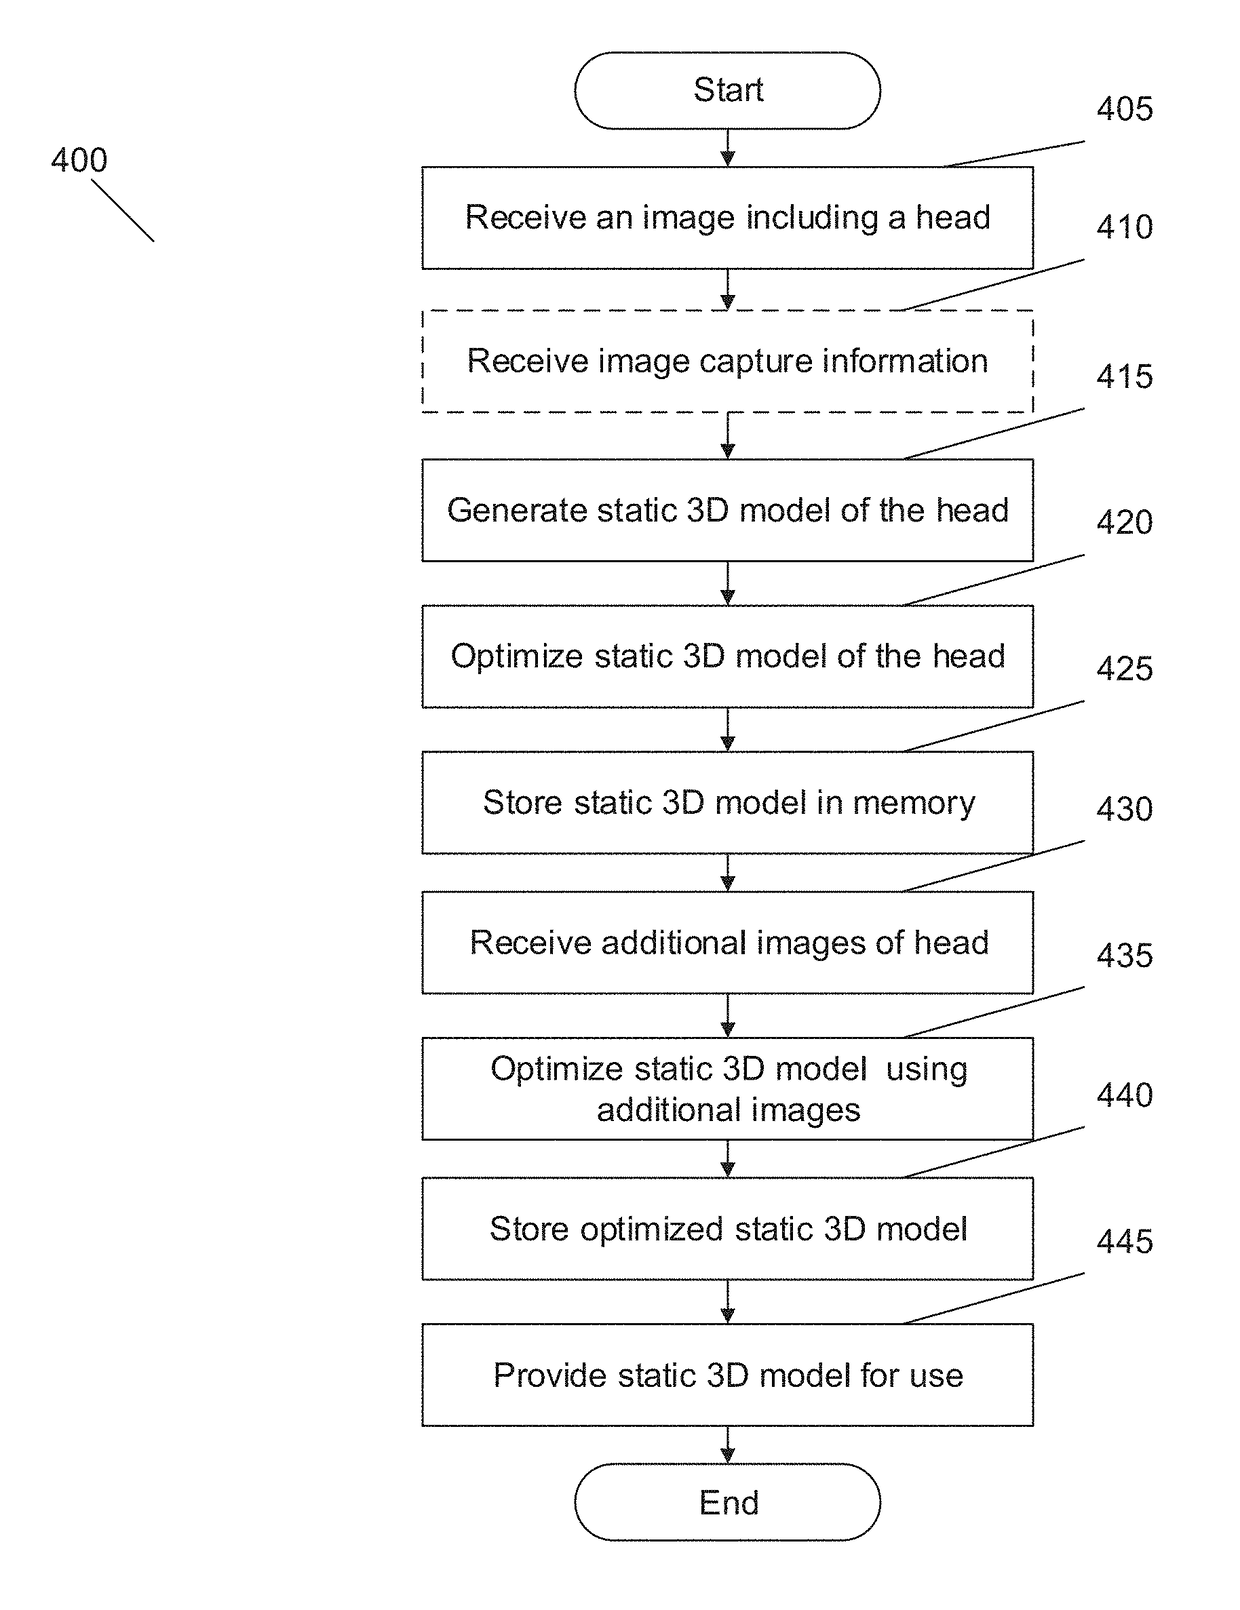 Systems and methods for generating computer ready animation models of a human head from captured data images